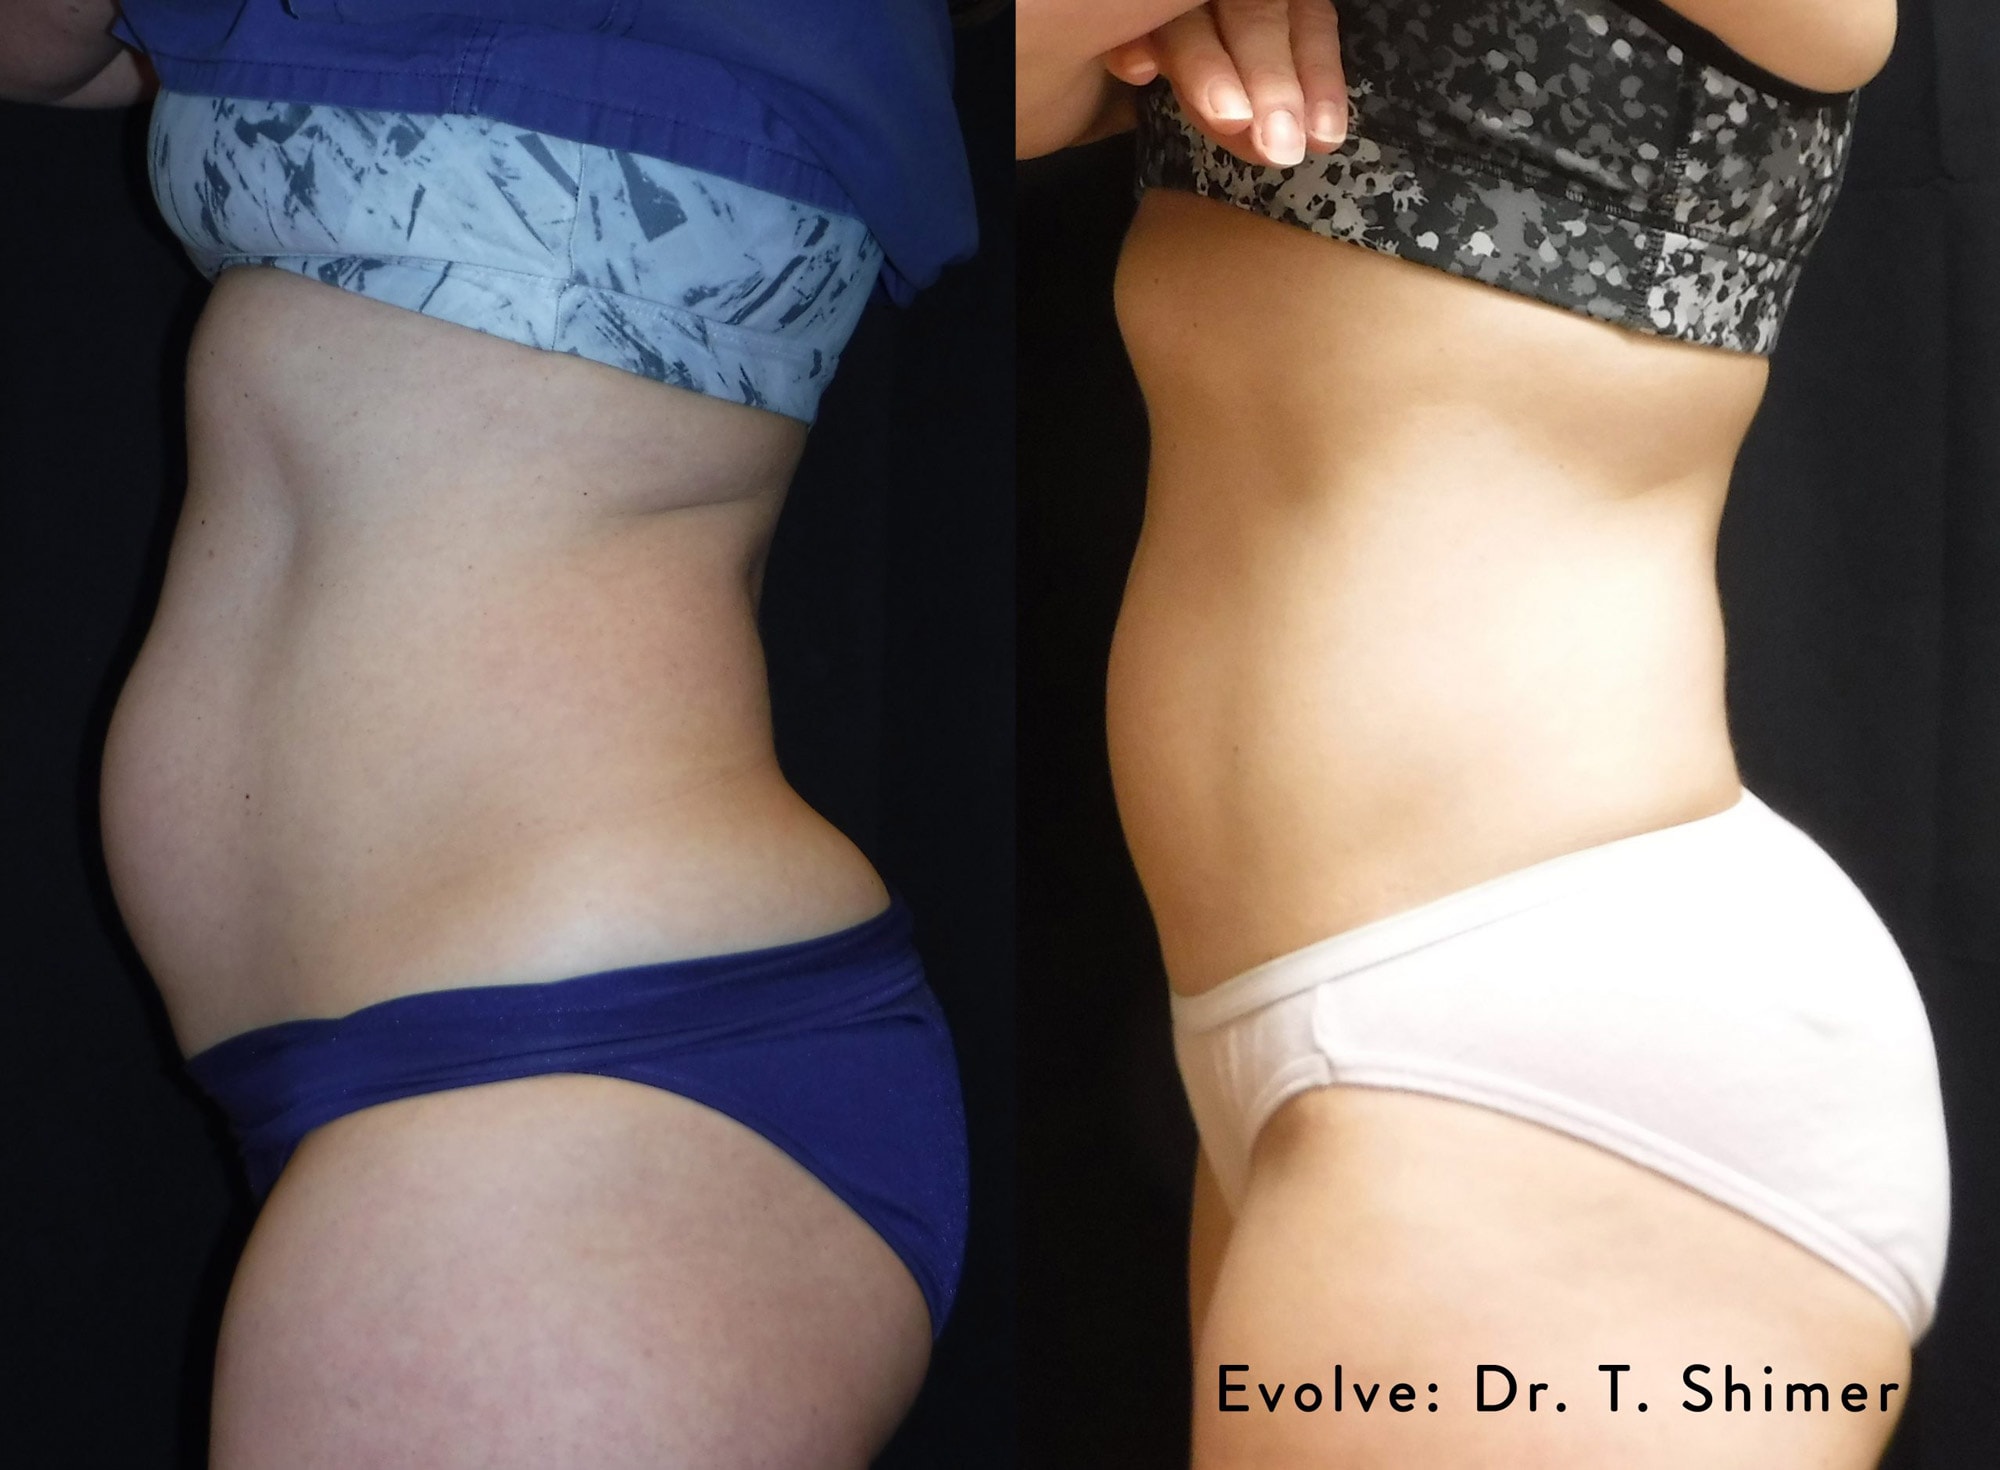 Before and After photos of Evolve X treatments reducing fat and contouring a woman’s abdomen and butt